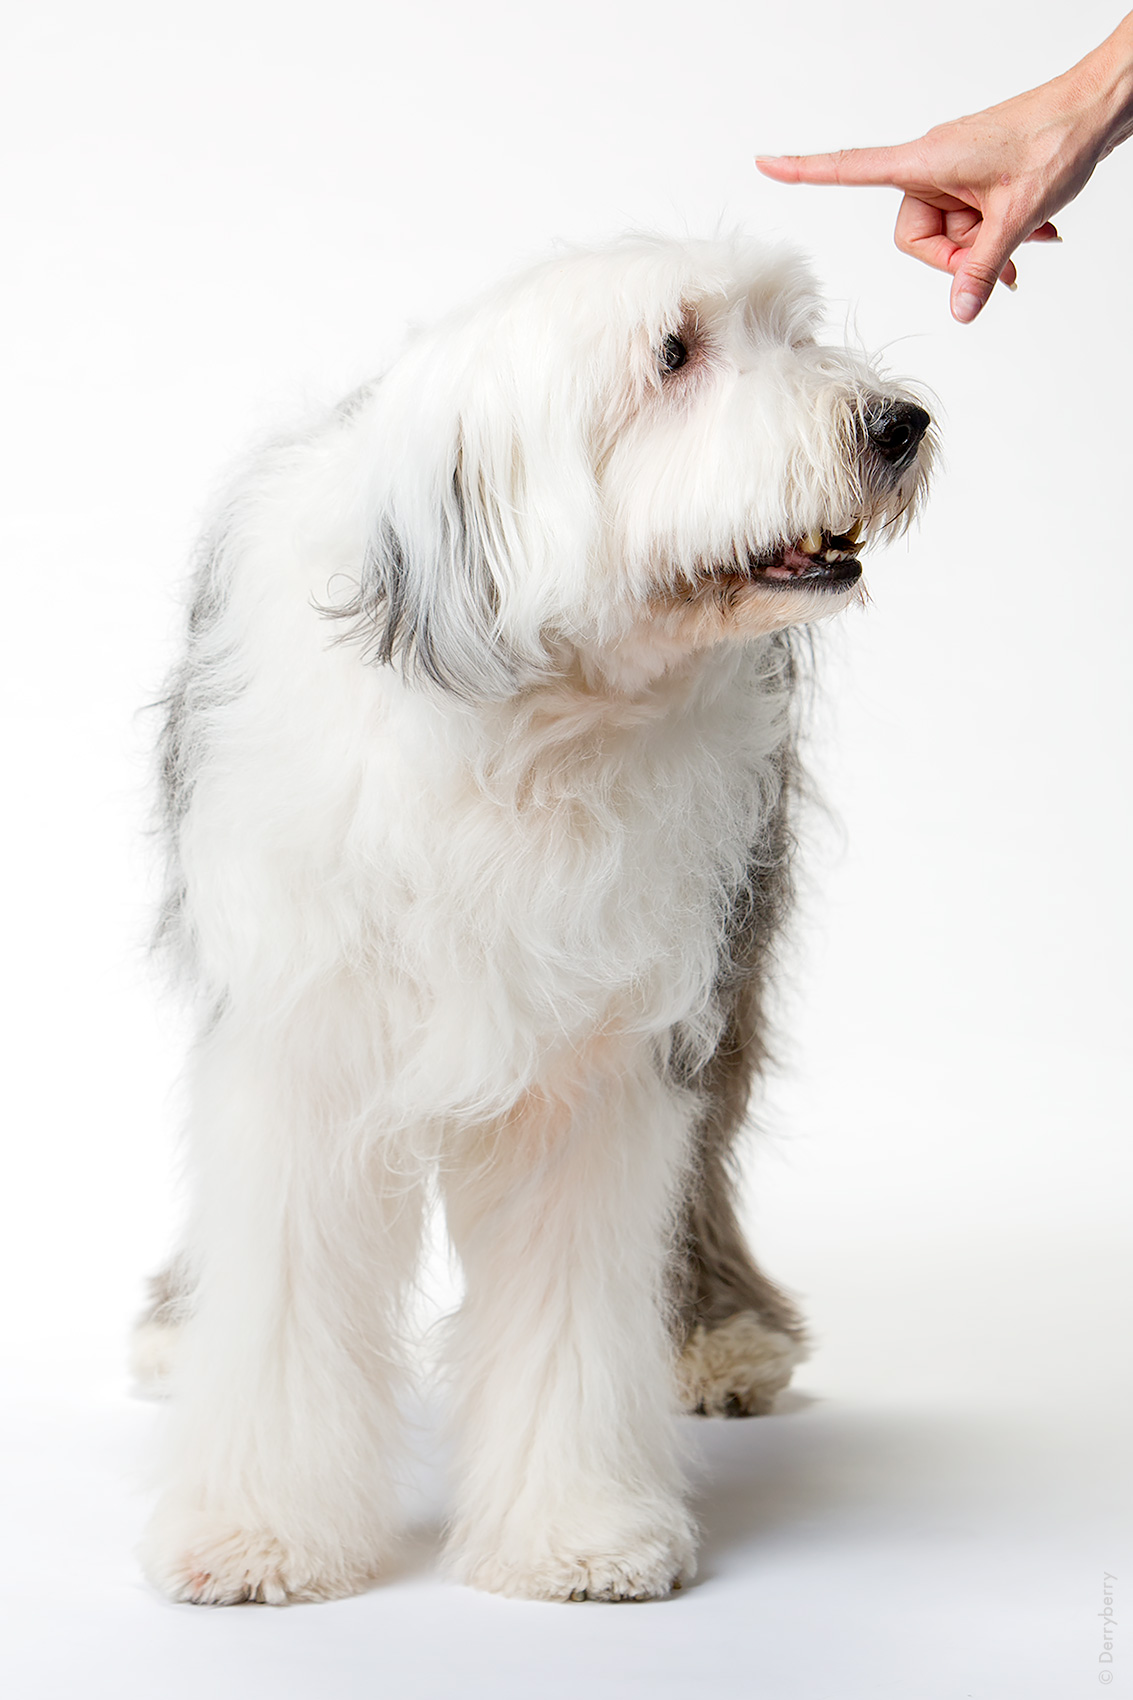 Portrait of an English sheep dog in the studio being told to stay  in Dallas, Texas by photographer John Derryberry Photography